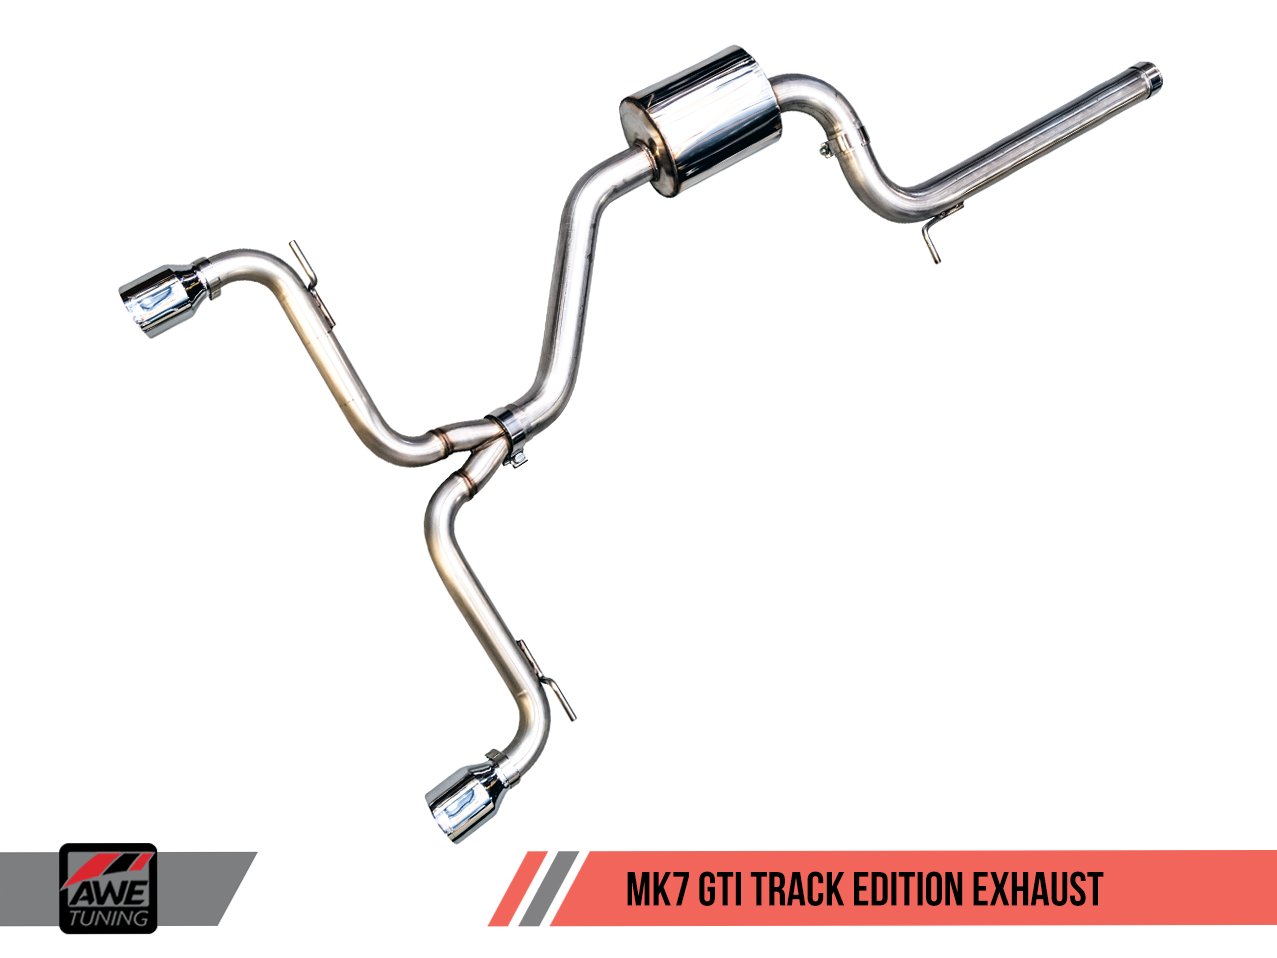 AWE Track Edition Exhaust for VW MK7 GTI